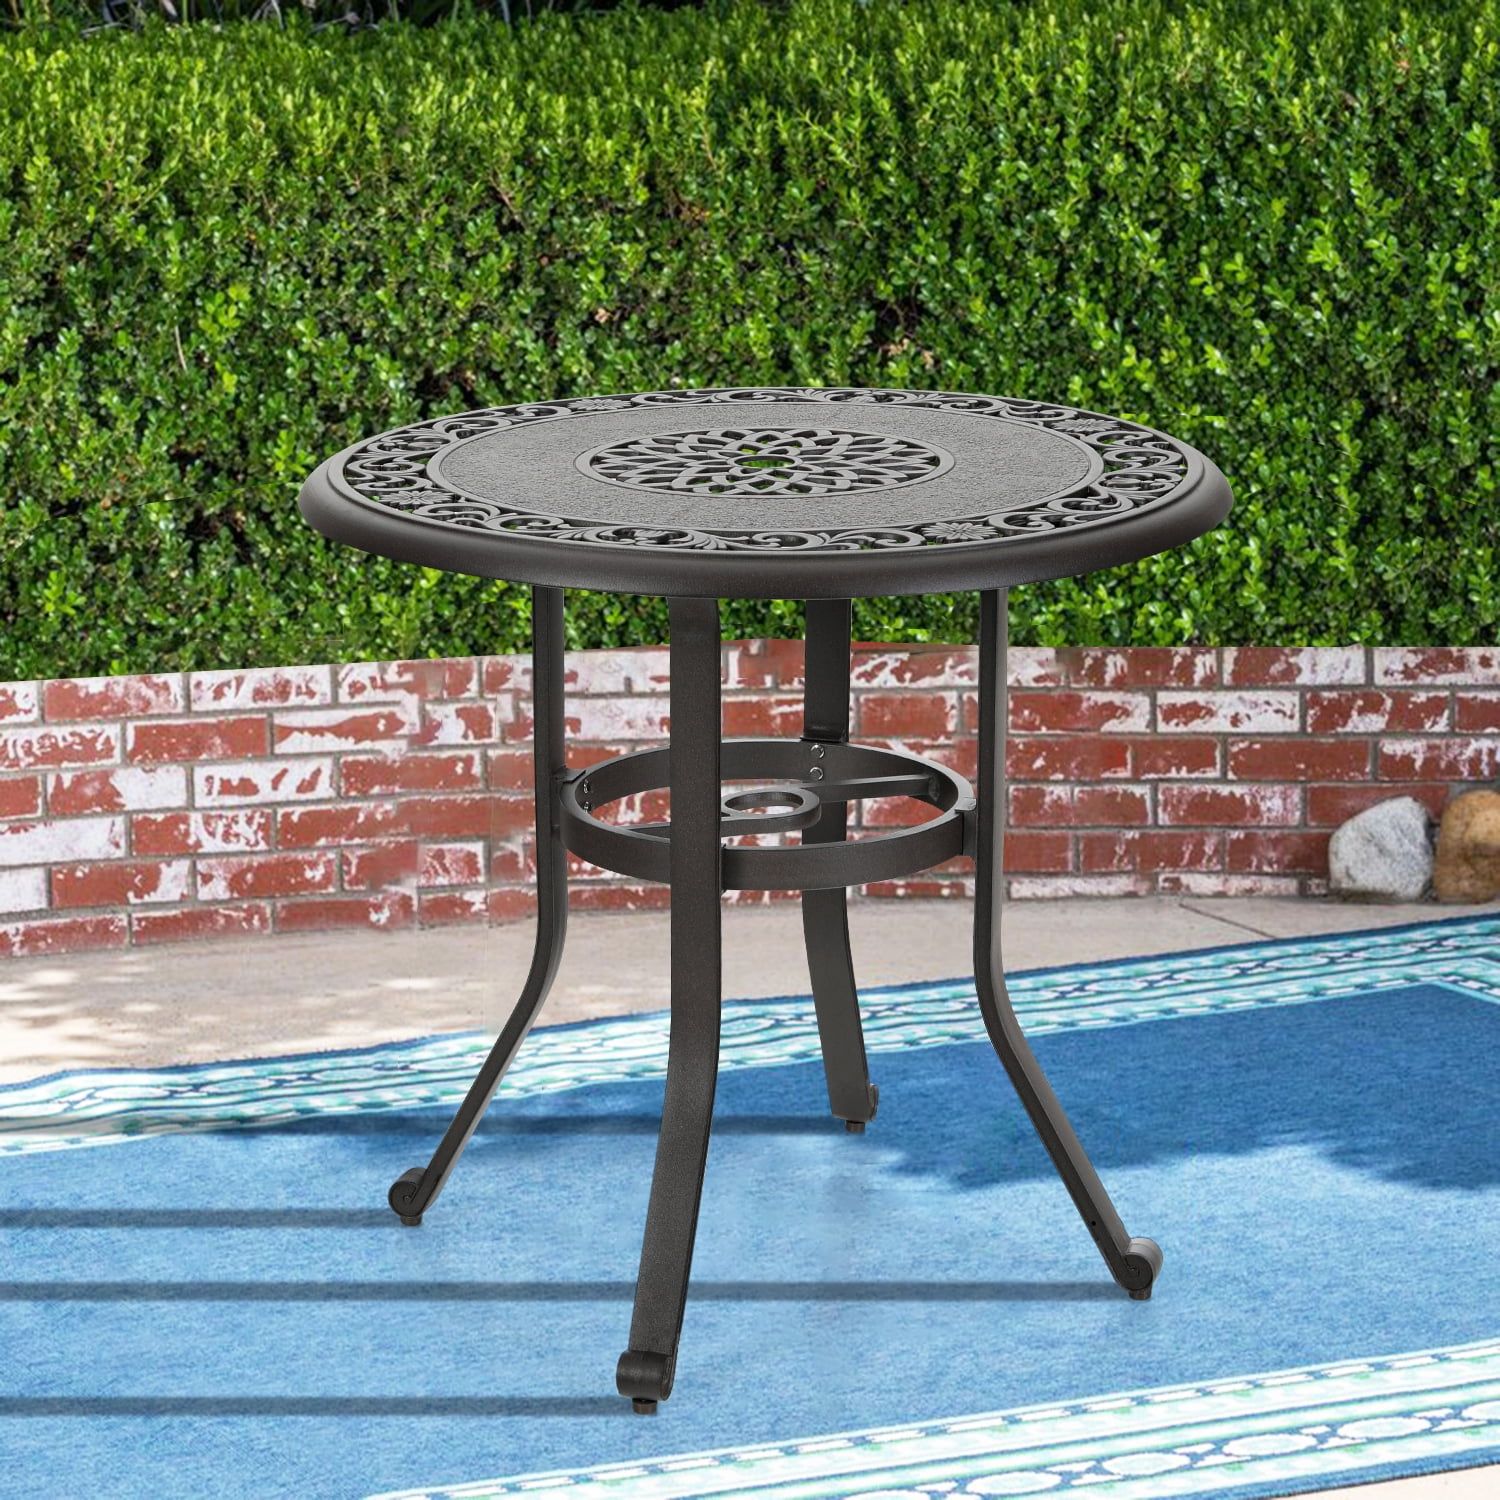 Mf Studio 32" Cast Aluminum Patio Outdoor Bistro Table, Round Dining Pertaining To Round Steel Patio Coffee Tables (View 4 of 20)